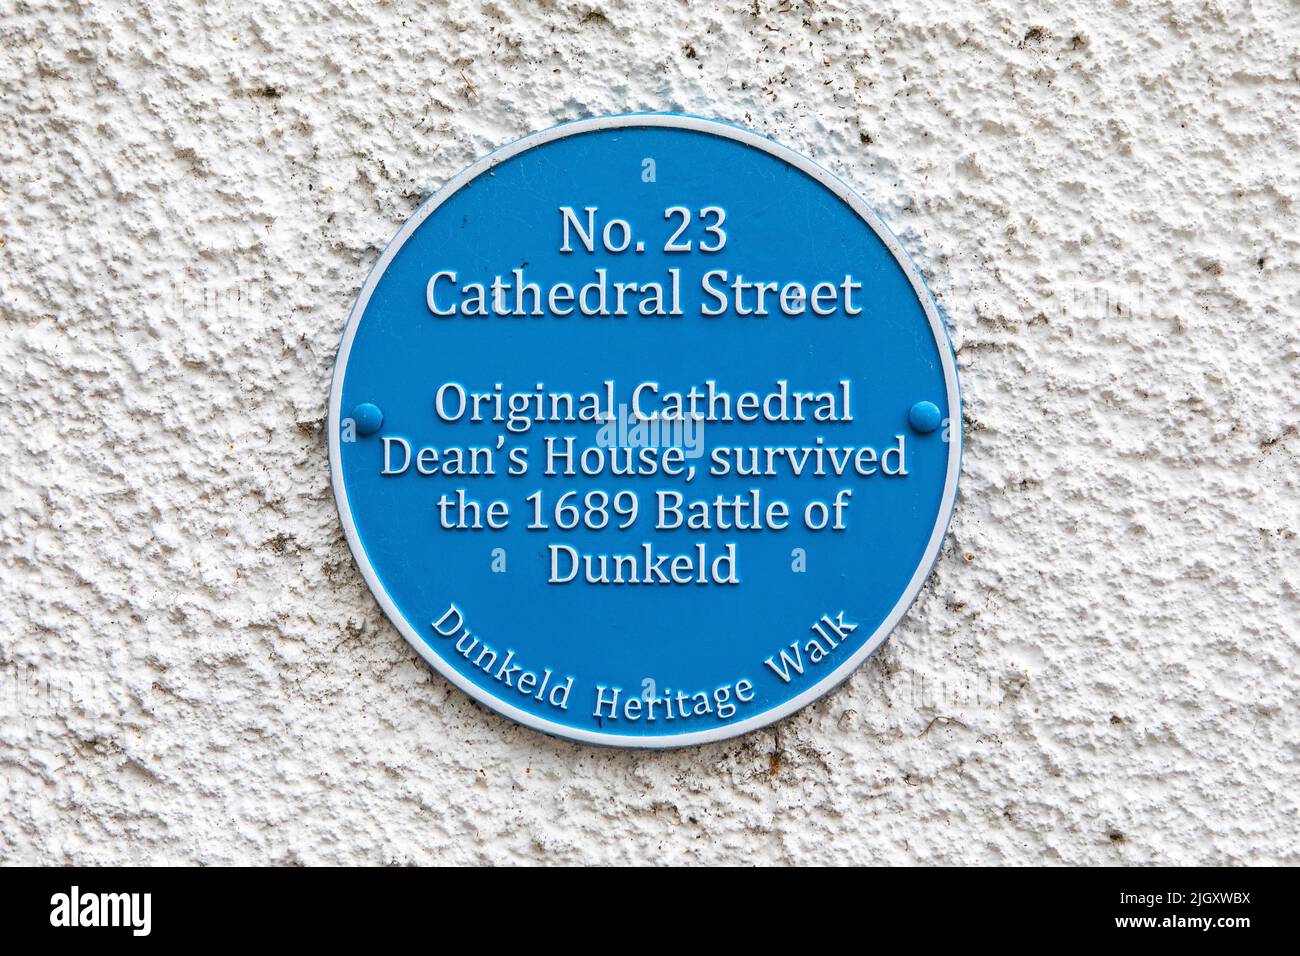 Dunkeld, Scotland - October 11th 2021: A blue plaque marking the location and history of No 23 Cathedral Street in the beautiful town of Dunkeld in Sc Stock Photo